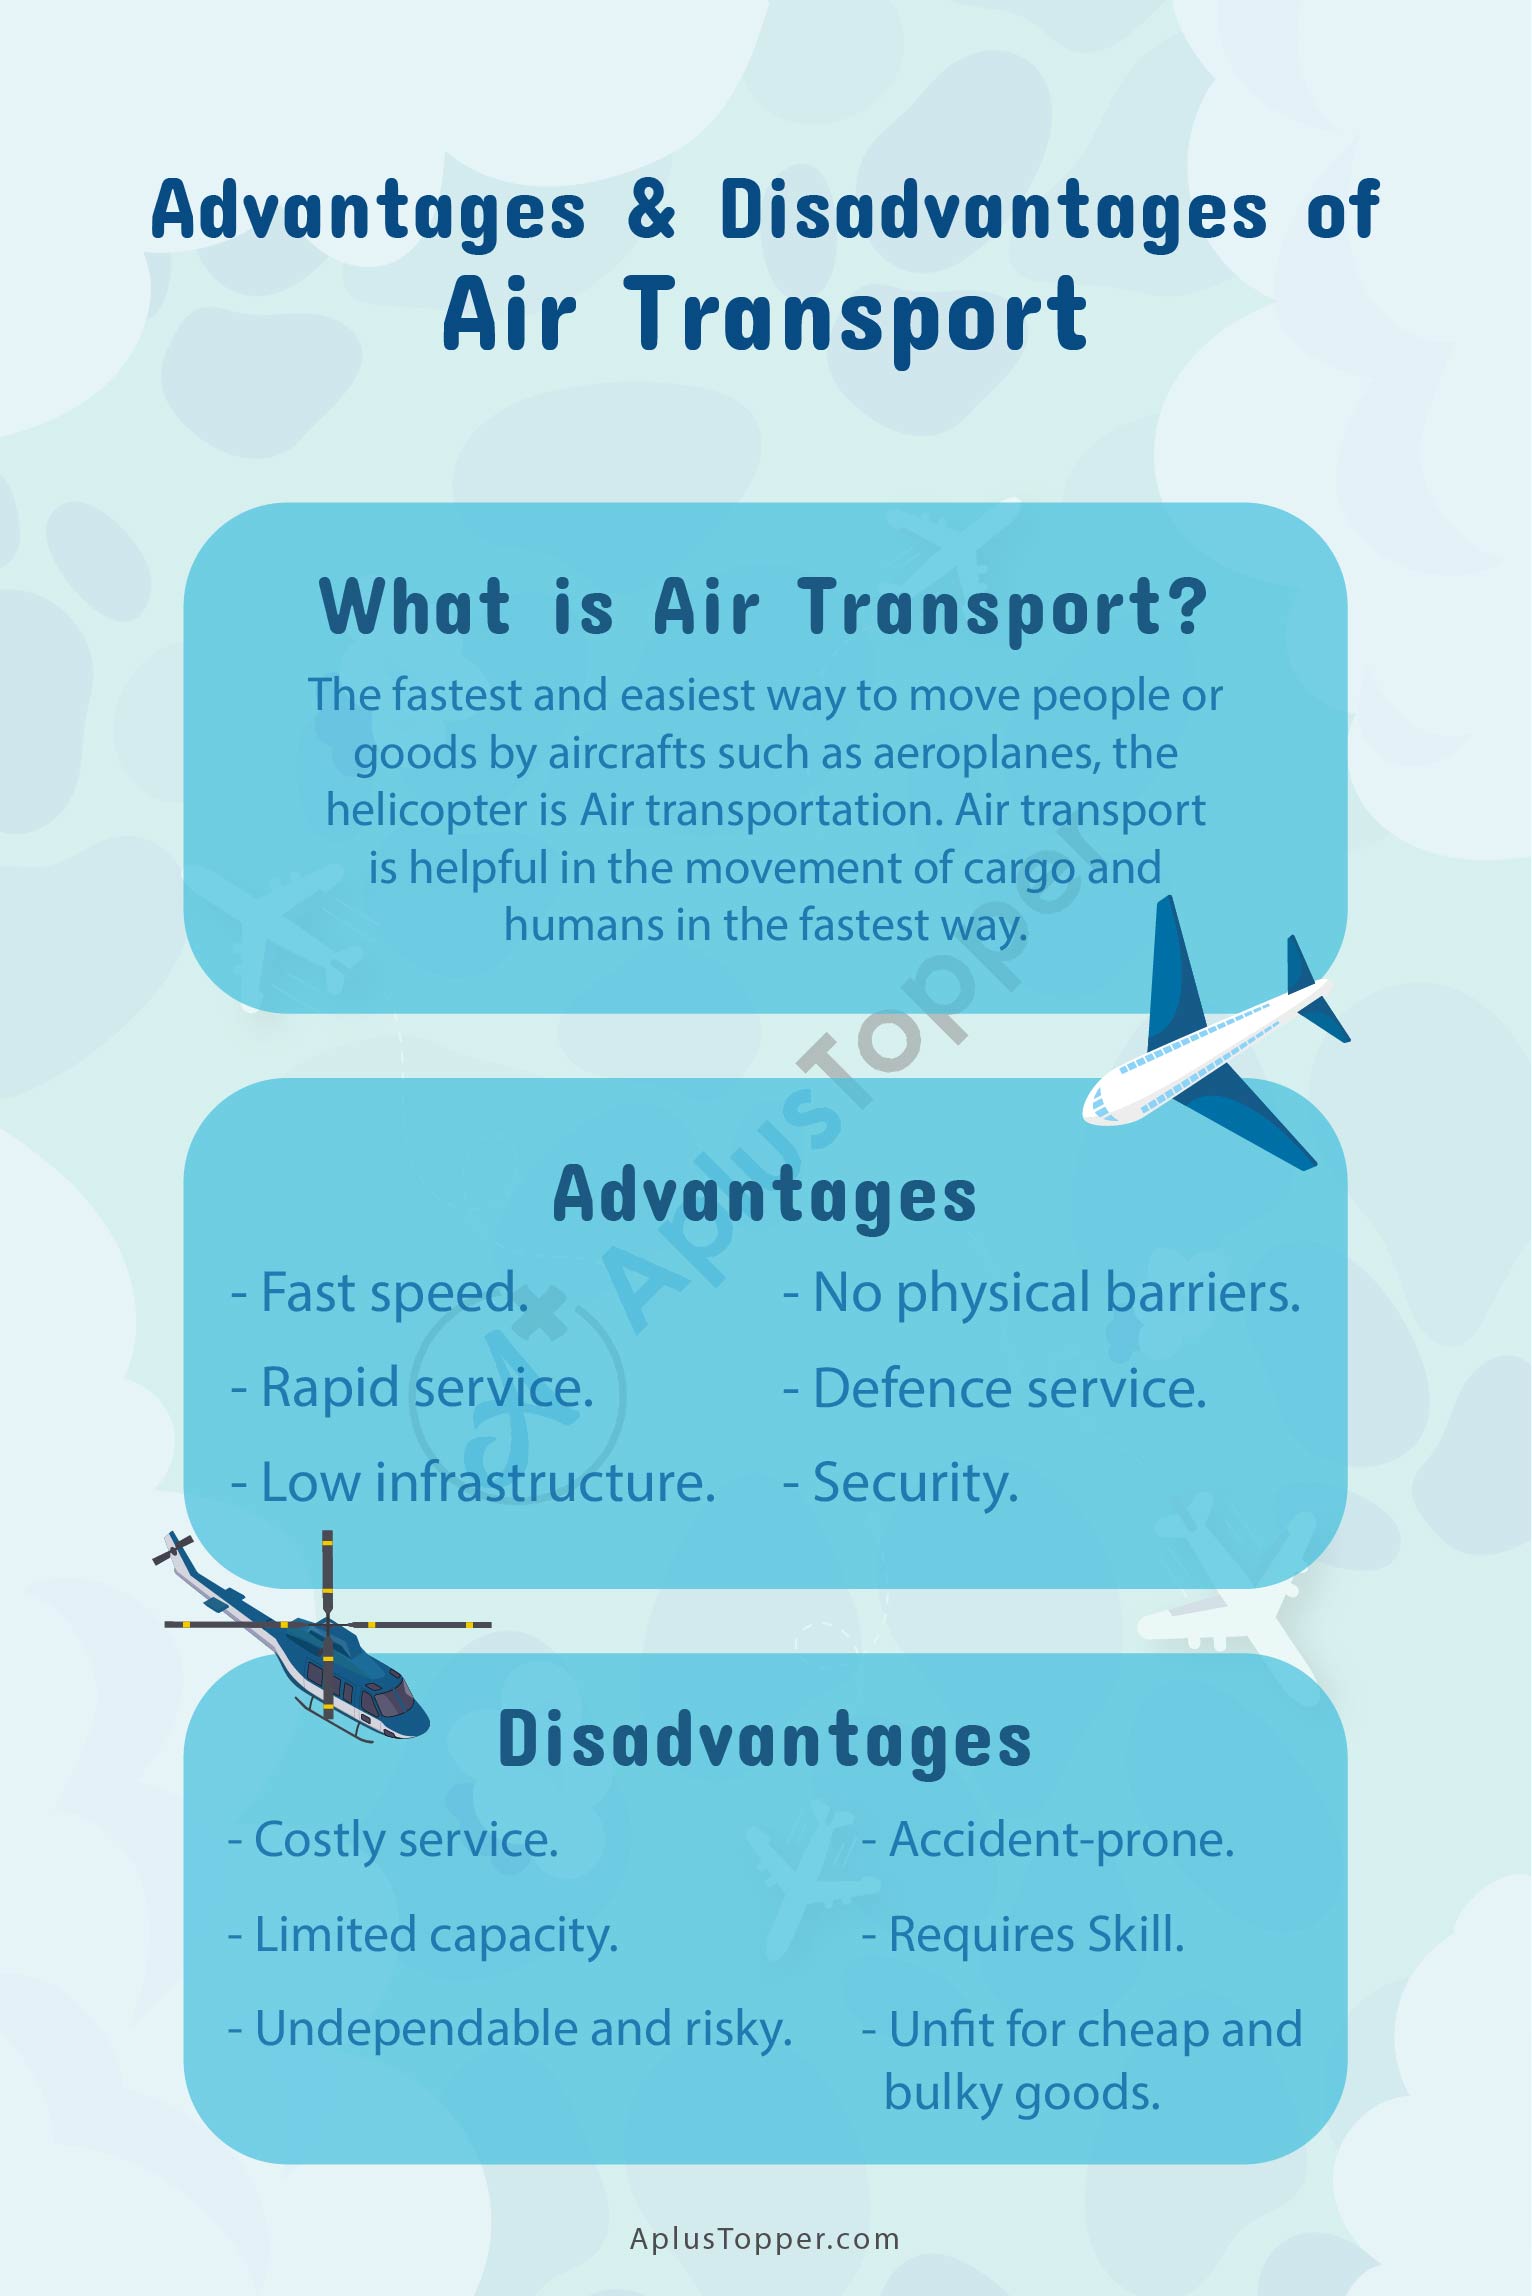 What Are the Benefits of Air Travel?